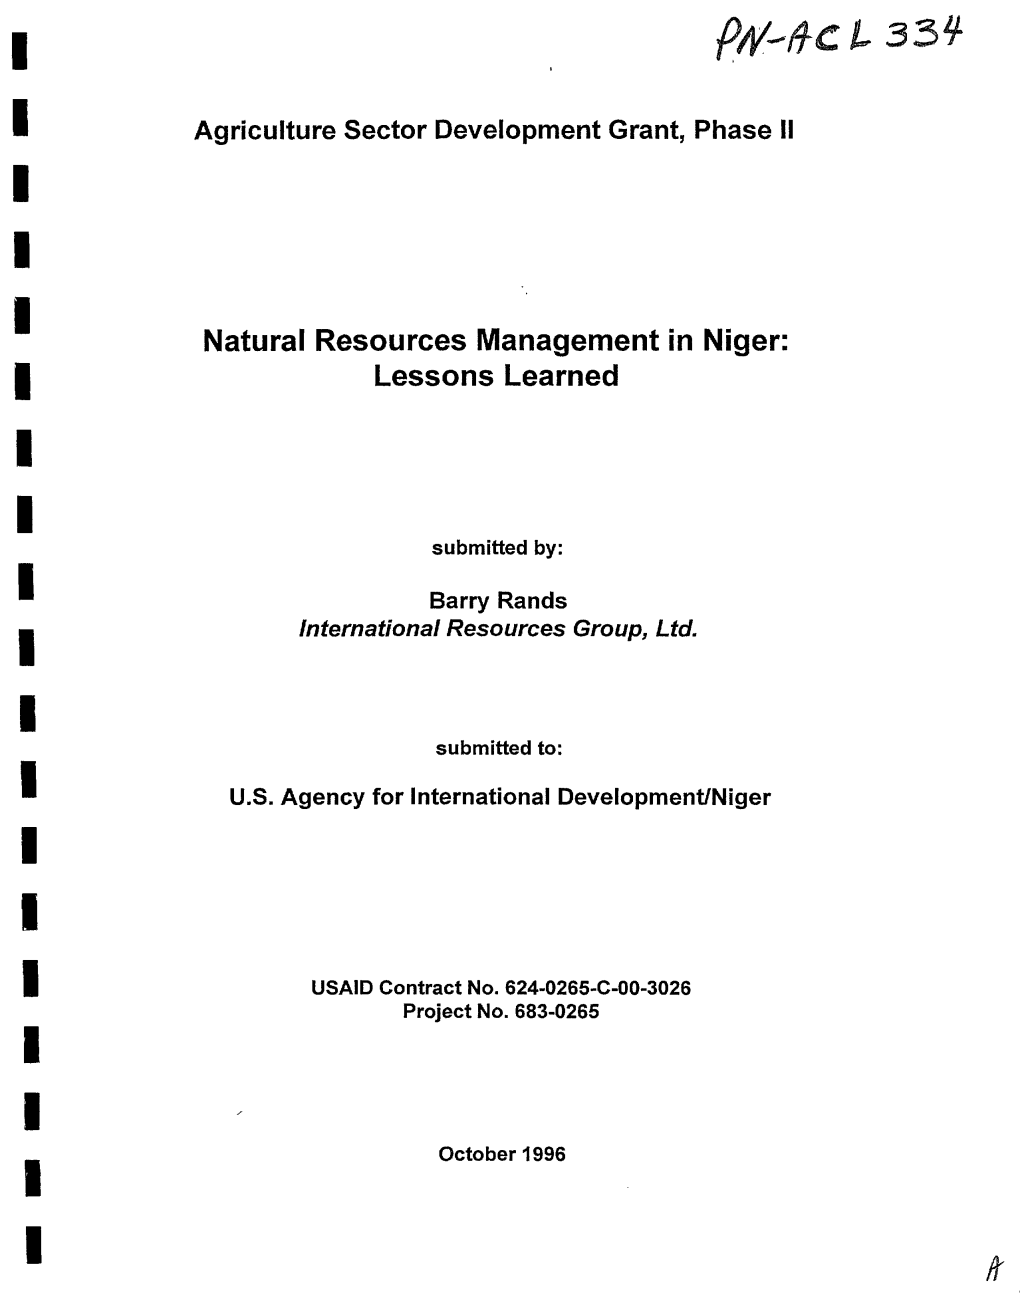 Natural Resources Management in Niger: Lessons Learned